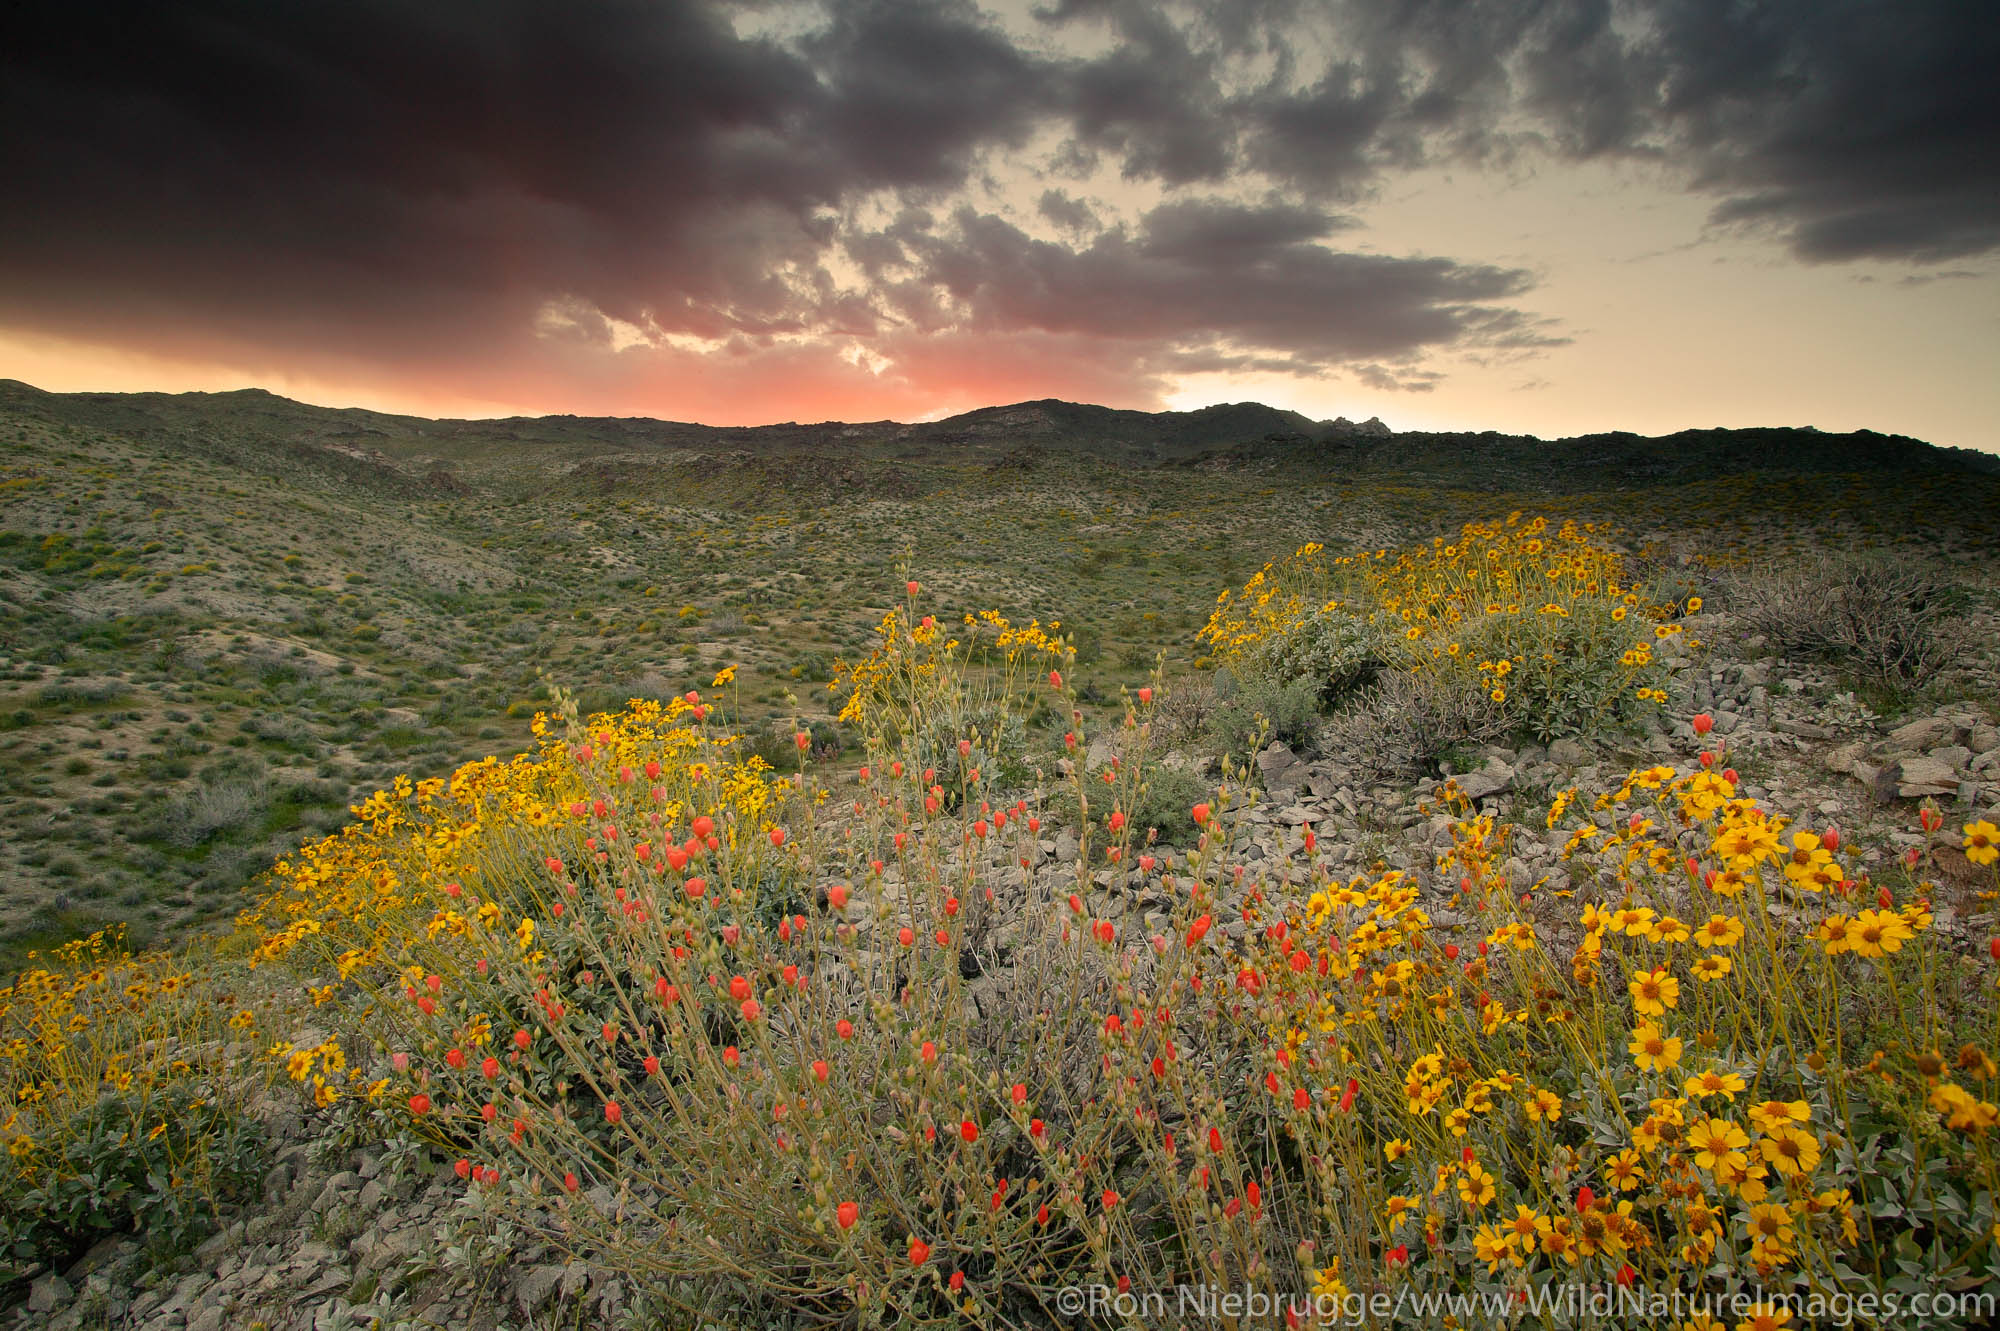 Brittlebush (Encelia farinosa) and Desert or Apricot Mallow (Sphaeralcea ambigua) wildflowers in the Newberry Mountains from...